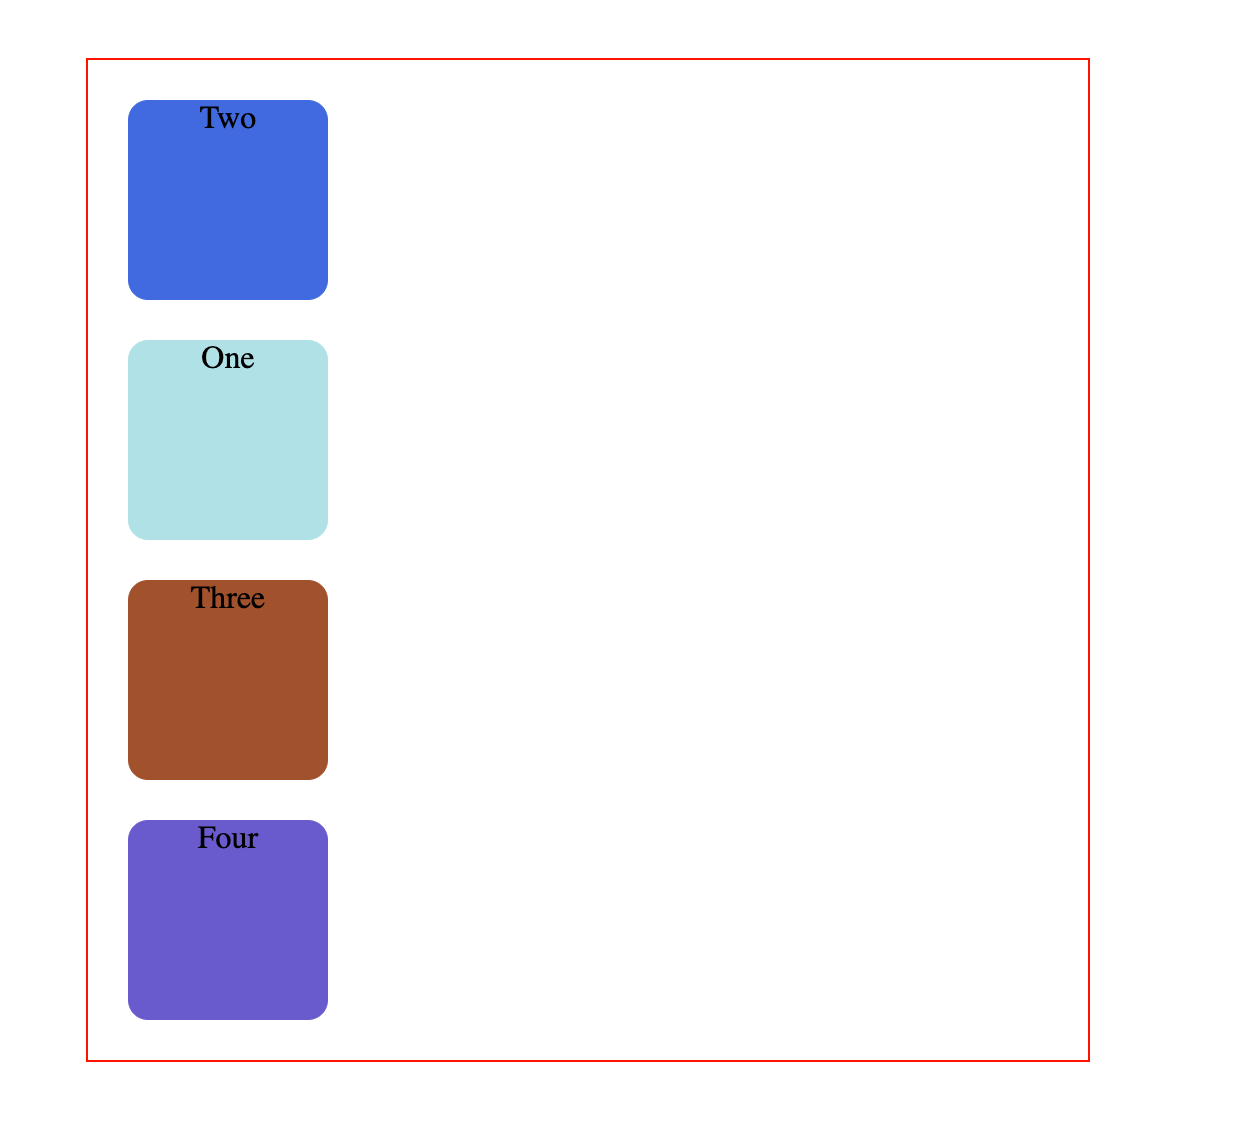 CSS Positioning – Position Absolute and Relative Example